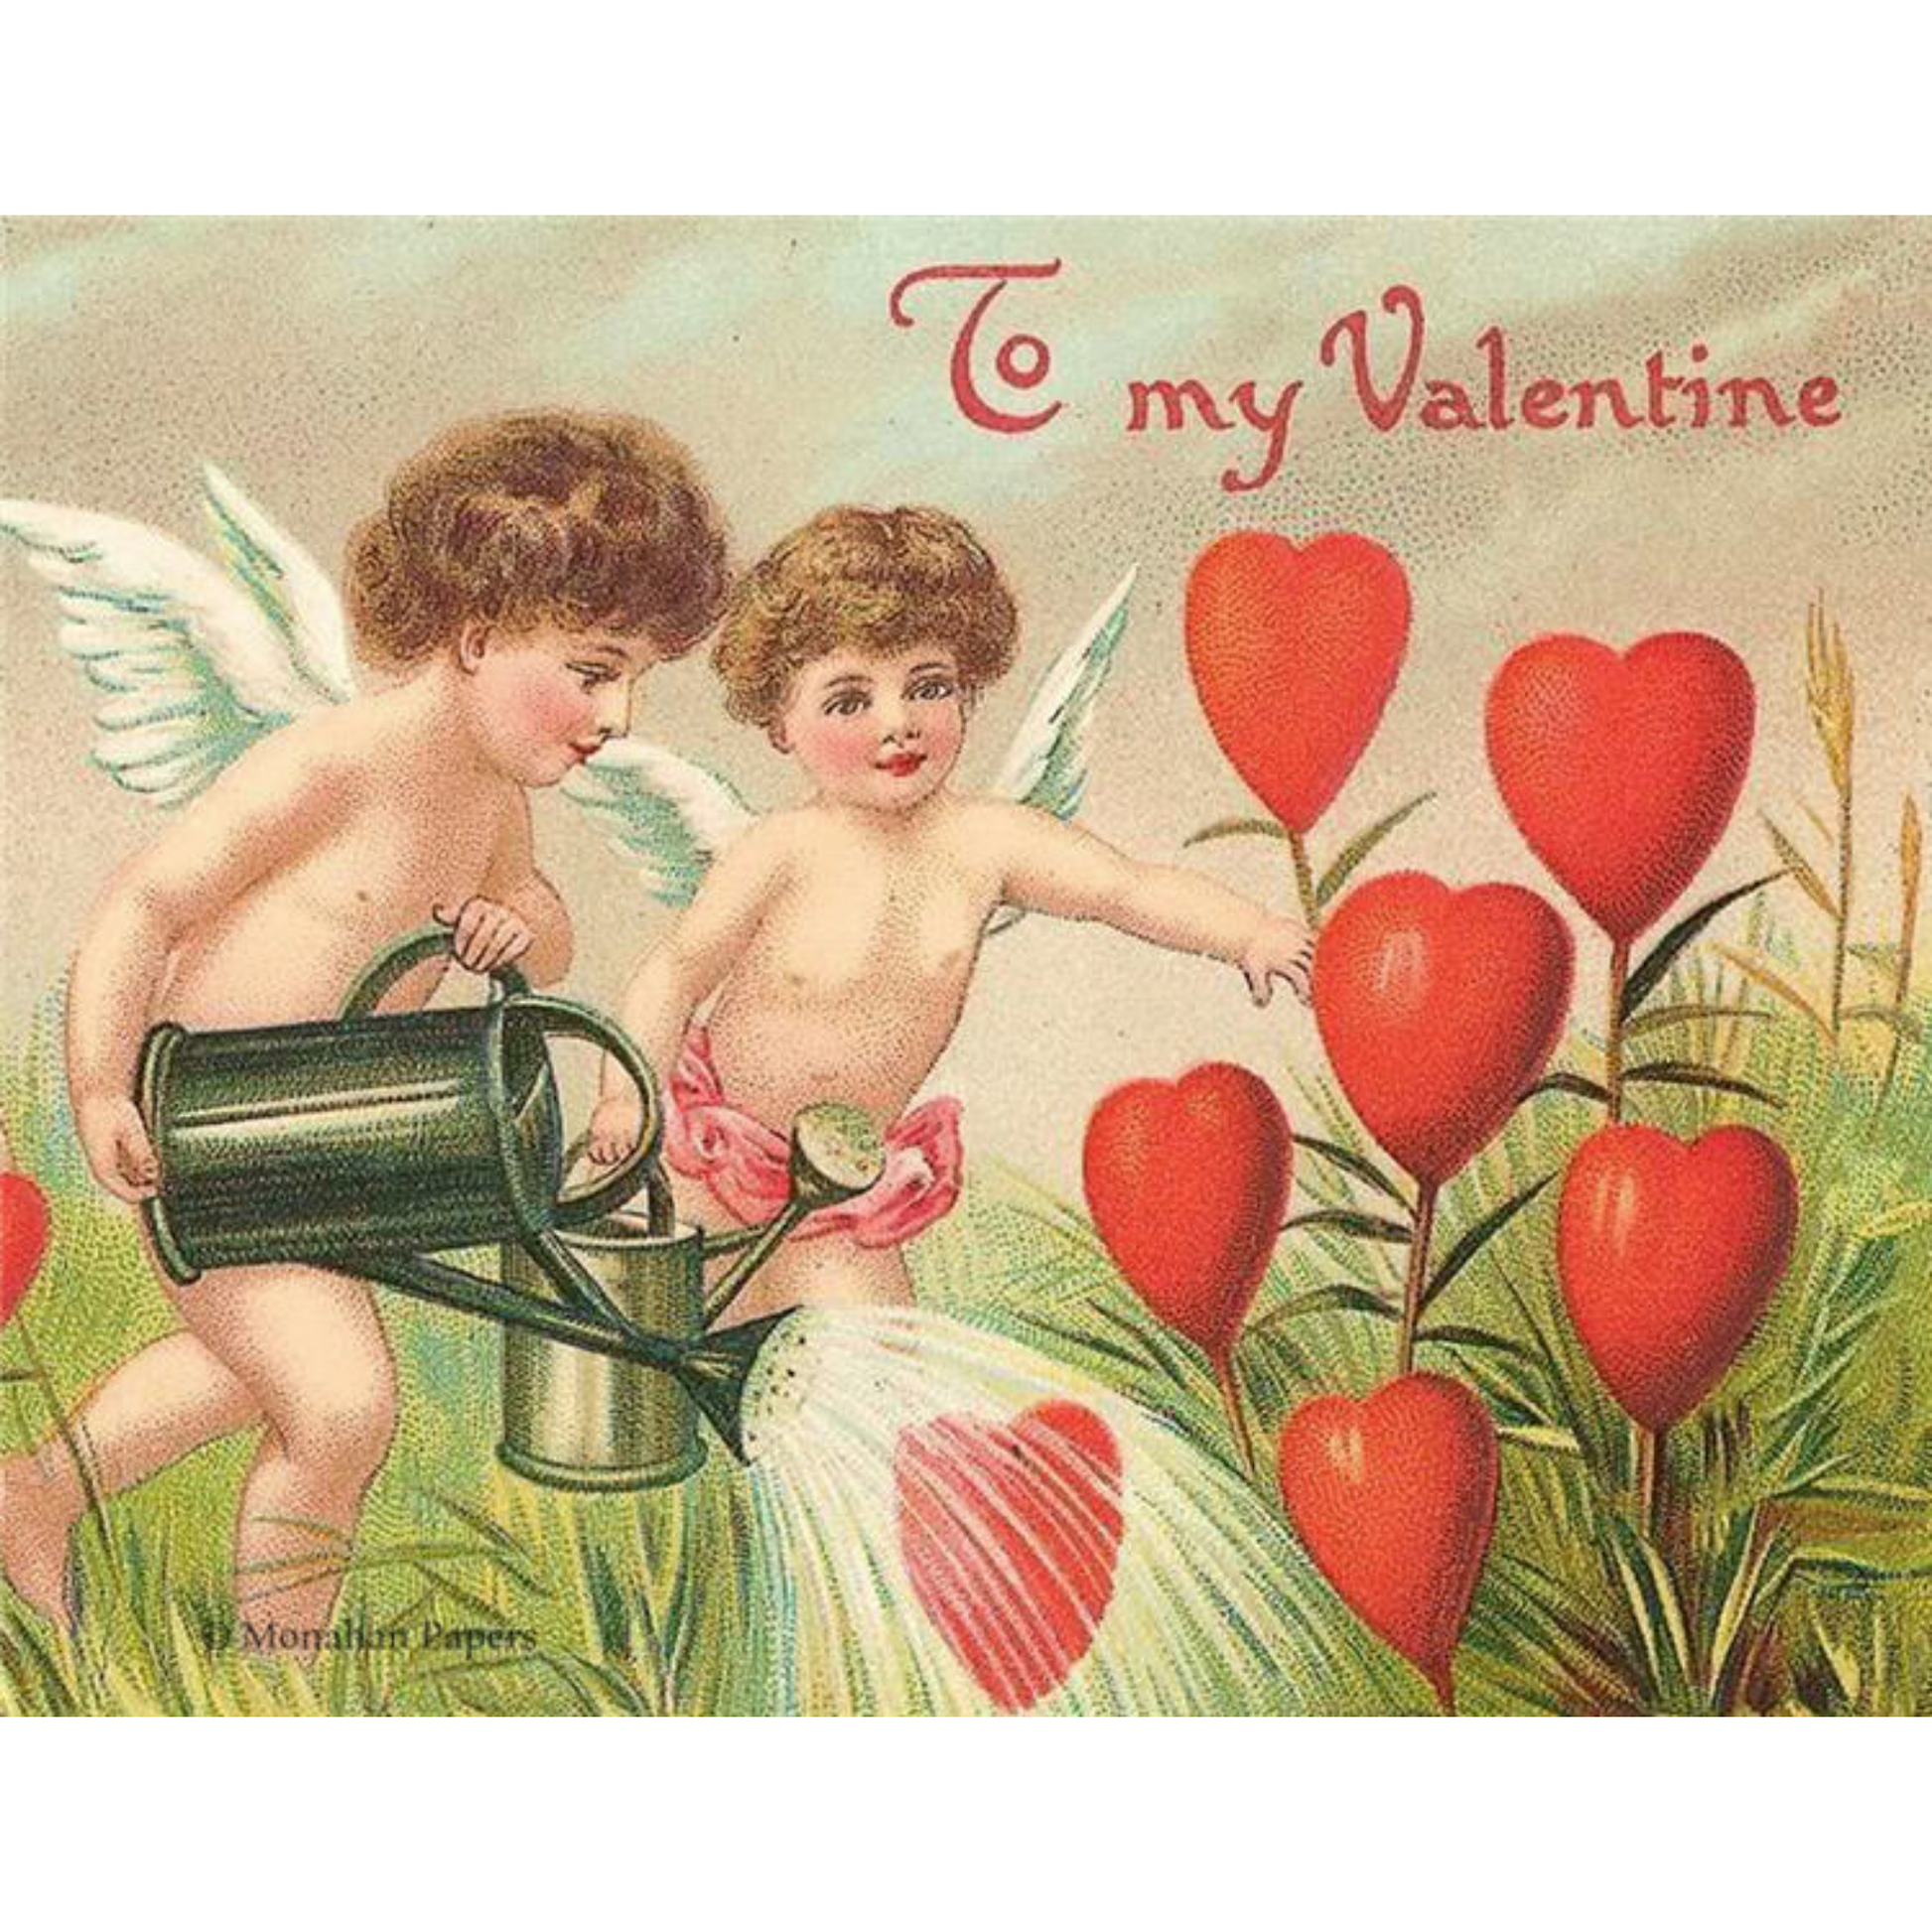 To My Valentine V58 decoupage paper by Monahan Papers available at Milton's Daughter.  11"x17". Pair of cupids watering heart flowers. Valentine's Day motif.